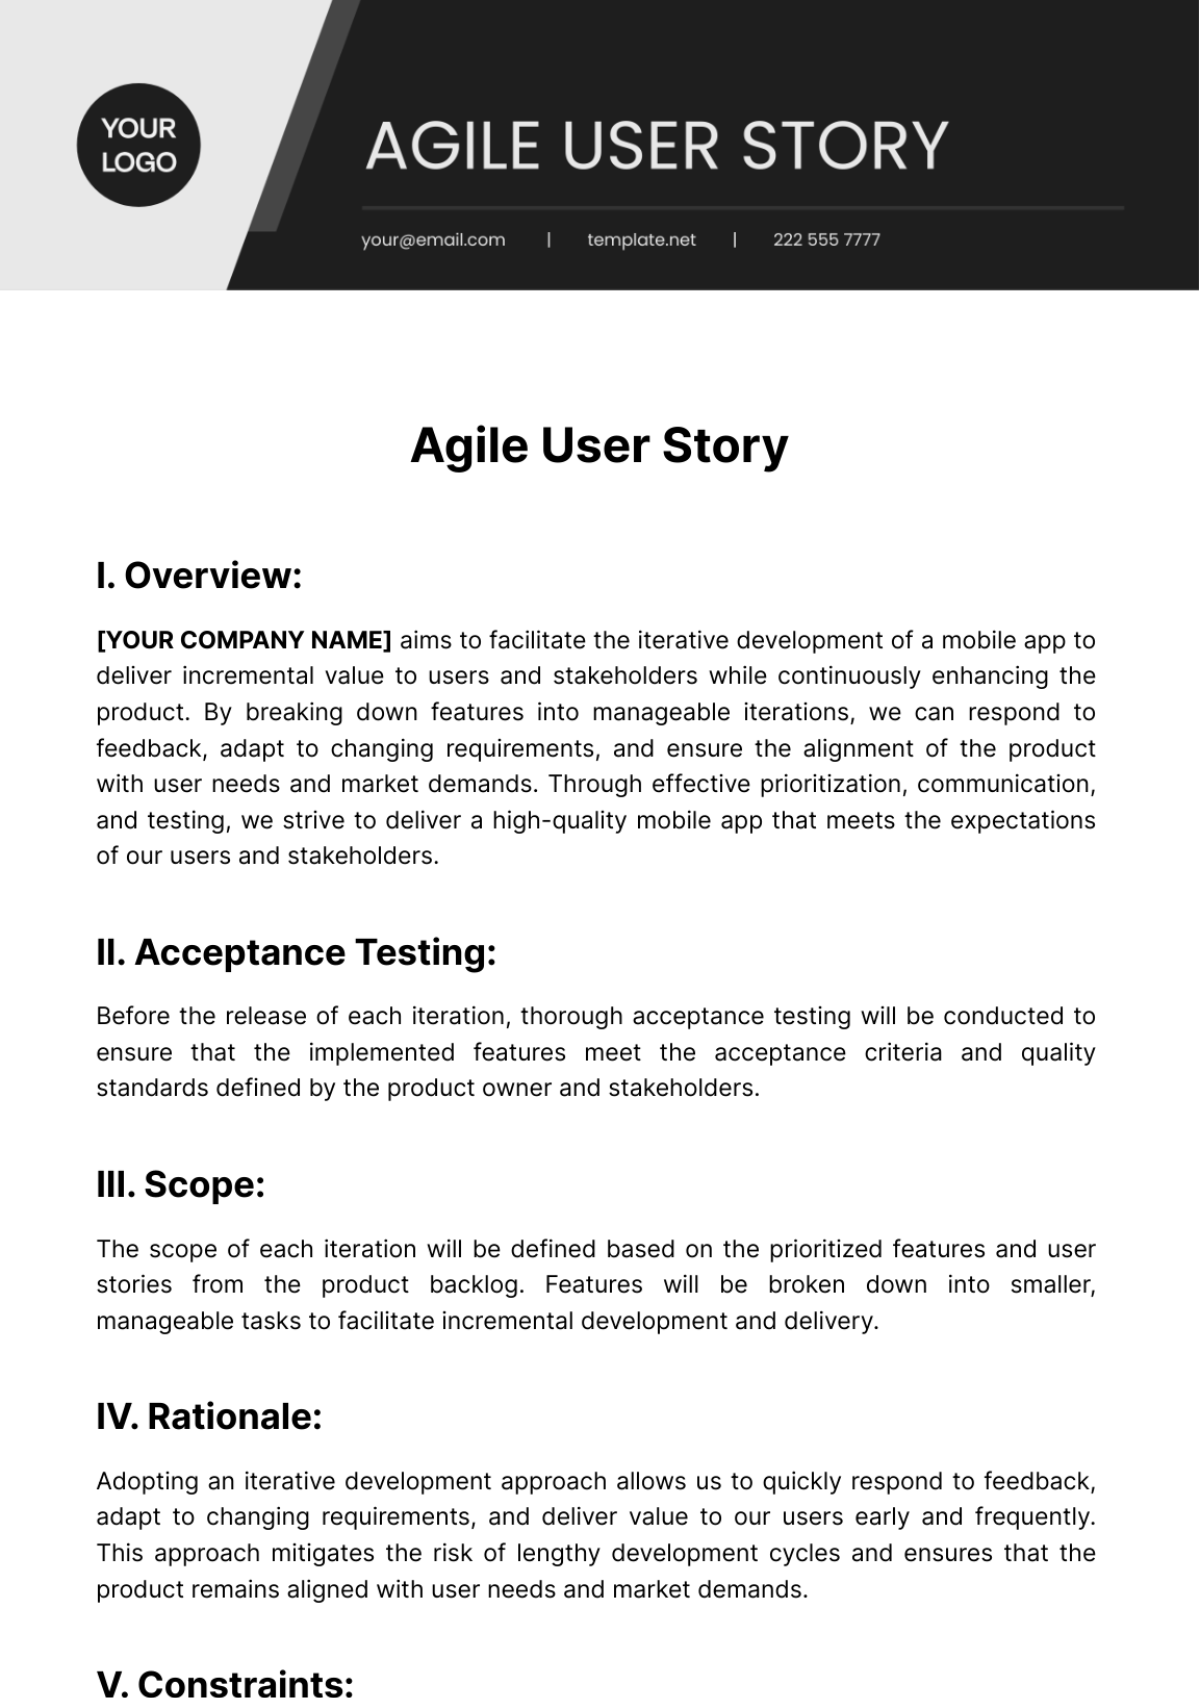 Free Agile User Story Template